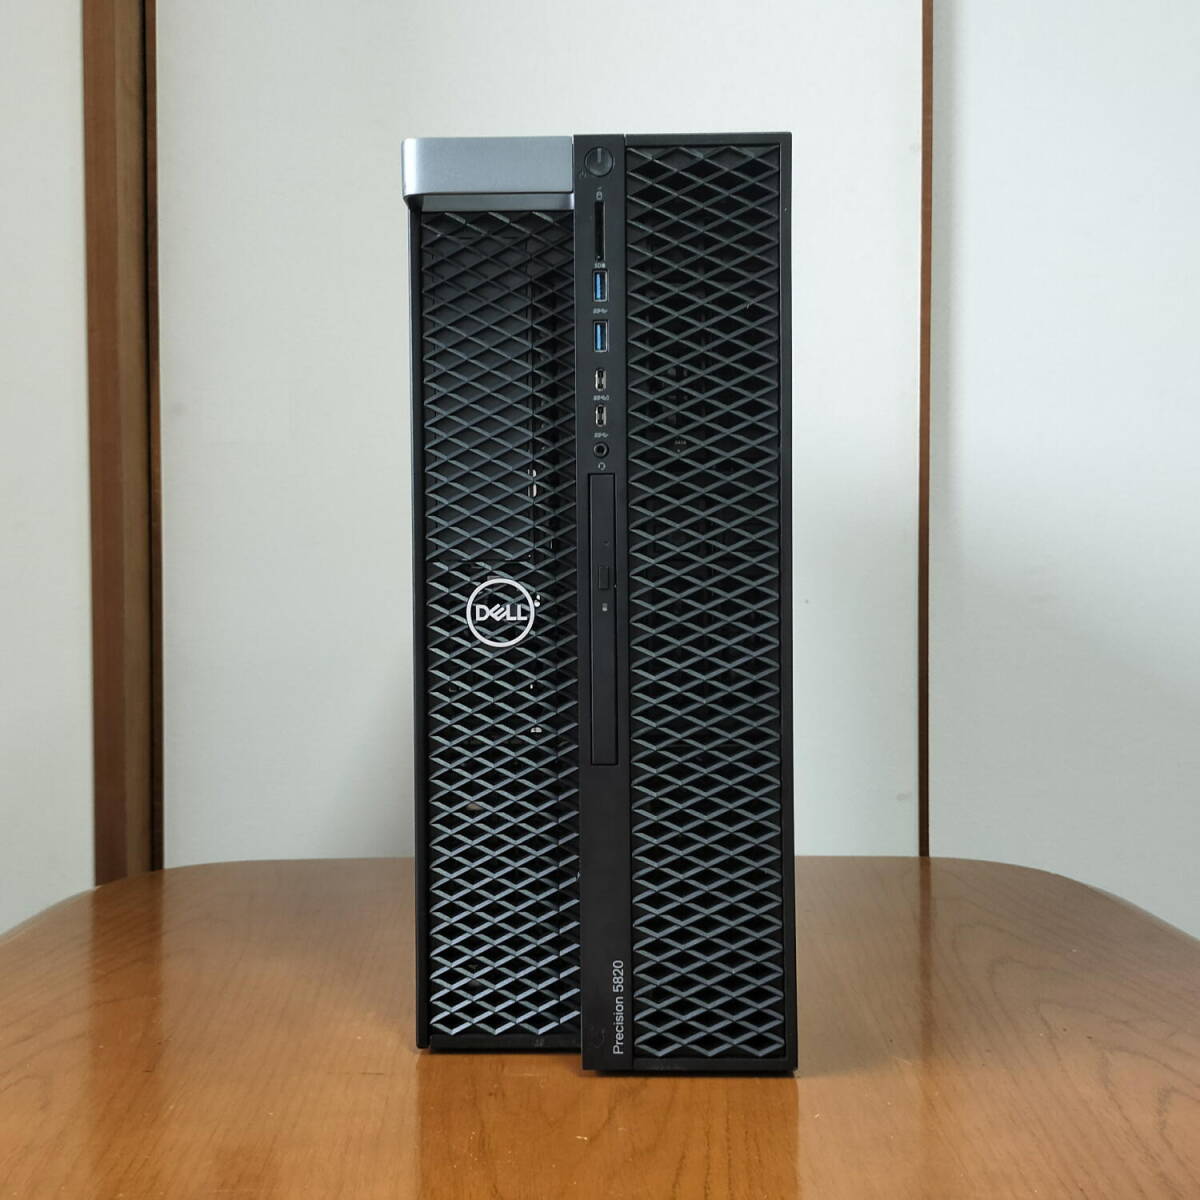 DELL Precision 5820 Tower Core i9-9900以上 最大4.50GHz 8コア 16スレッド 32GB GTX 1660Ti 搭載ゲーミングPC！ 爆速 M.2 NVMe SSD 1TB_画像2